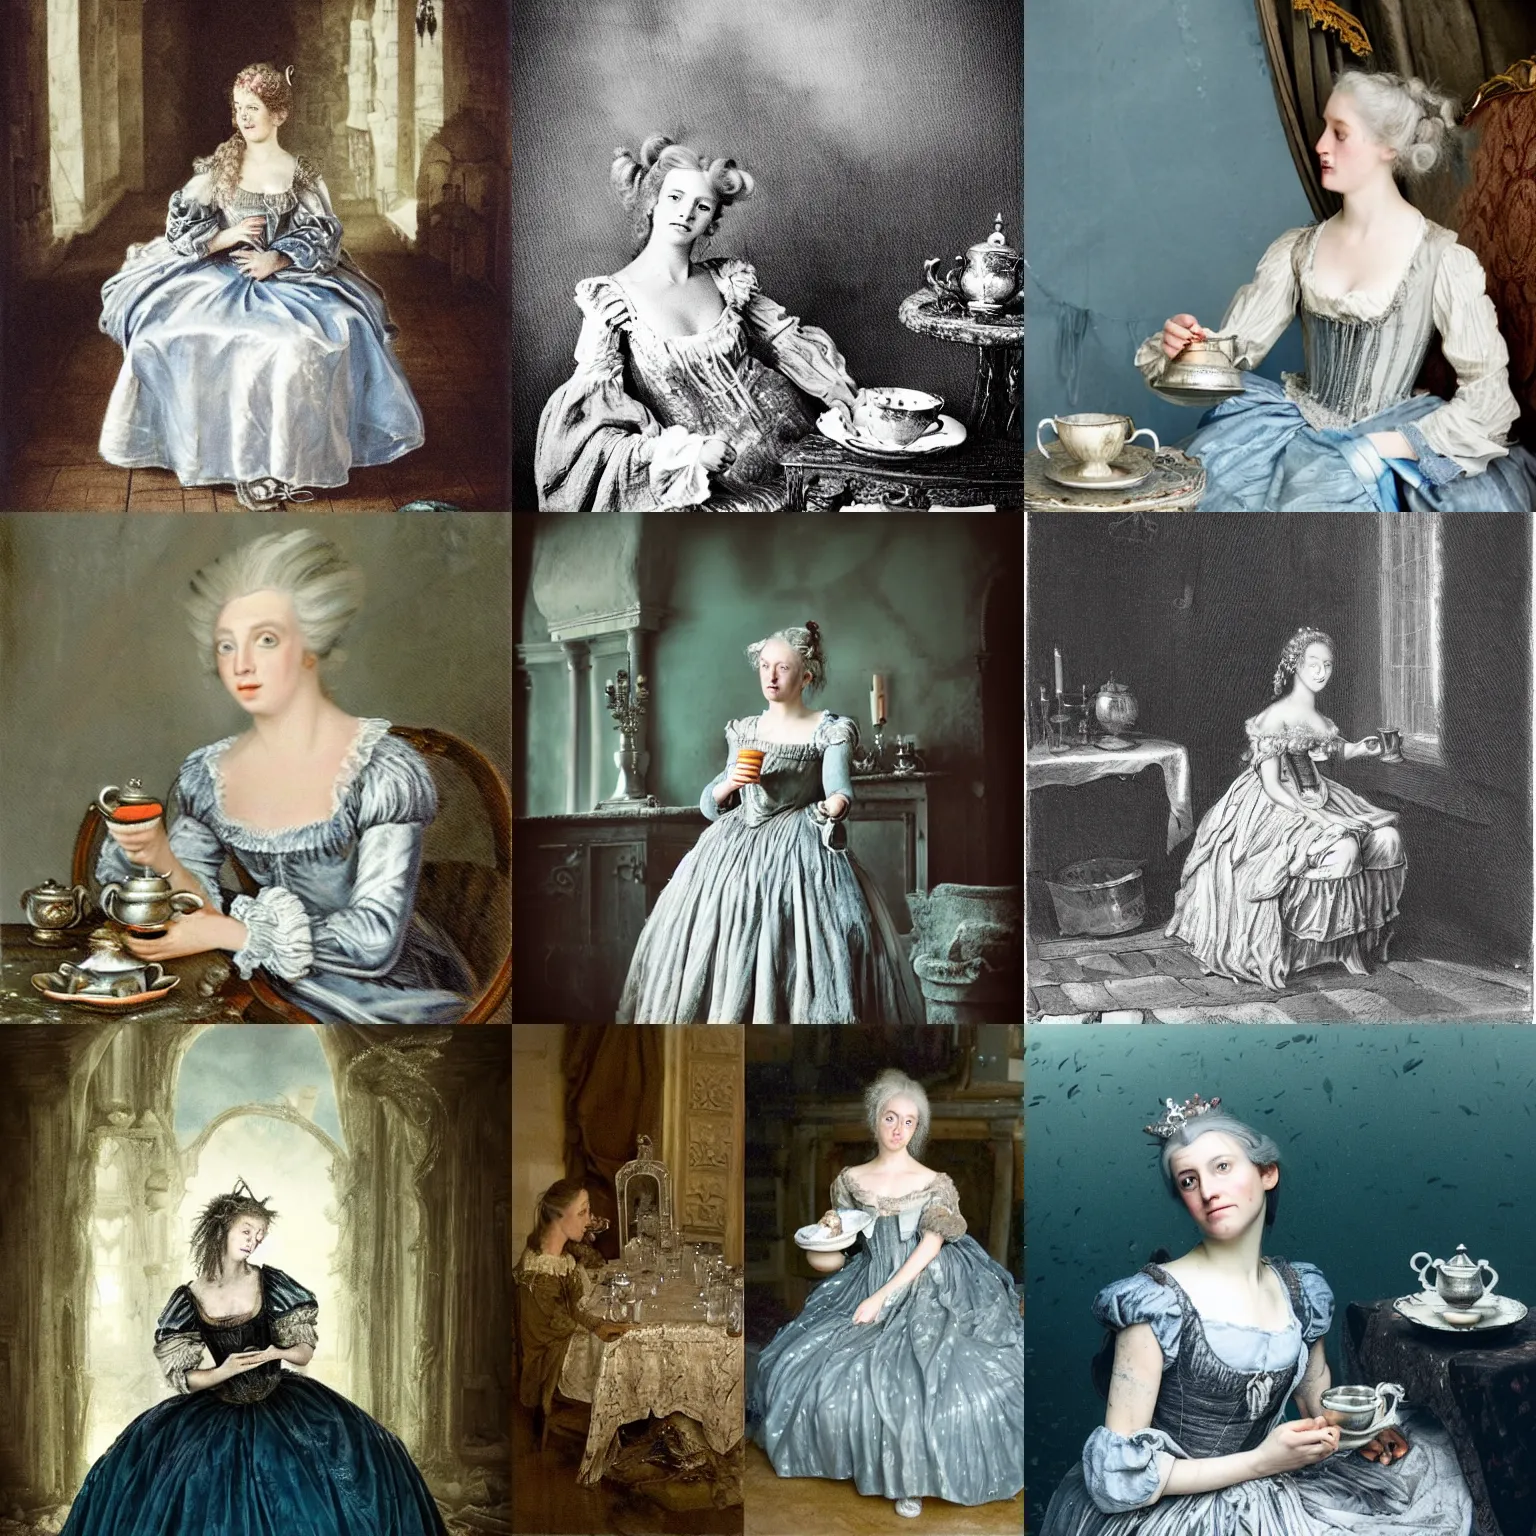 Prompt: A silver haired ((mad)) princess from the 18th century, dressed in a ragged, dirty, 18th century silver wedding dress, is ((drinking a cup of tea)), in her right side is a porcelain tea set. She is in her underwater, precious, scarry castle. mystical, atmospheric, greenish blue tones, underwater photography, concept art by John Everett Millais, Annie Stegg Gerard, Ian David Soar, John Anster Fitzgerald